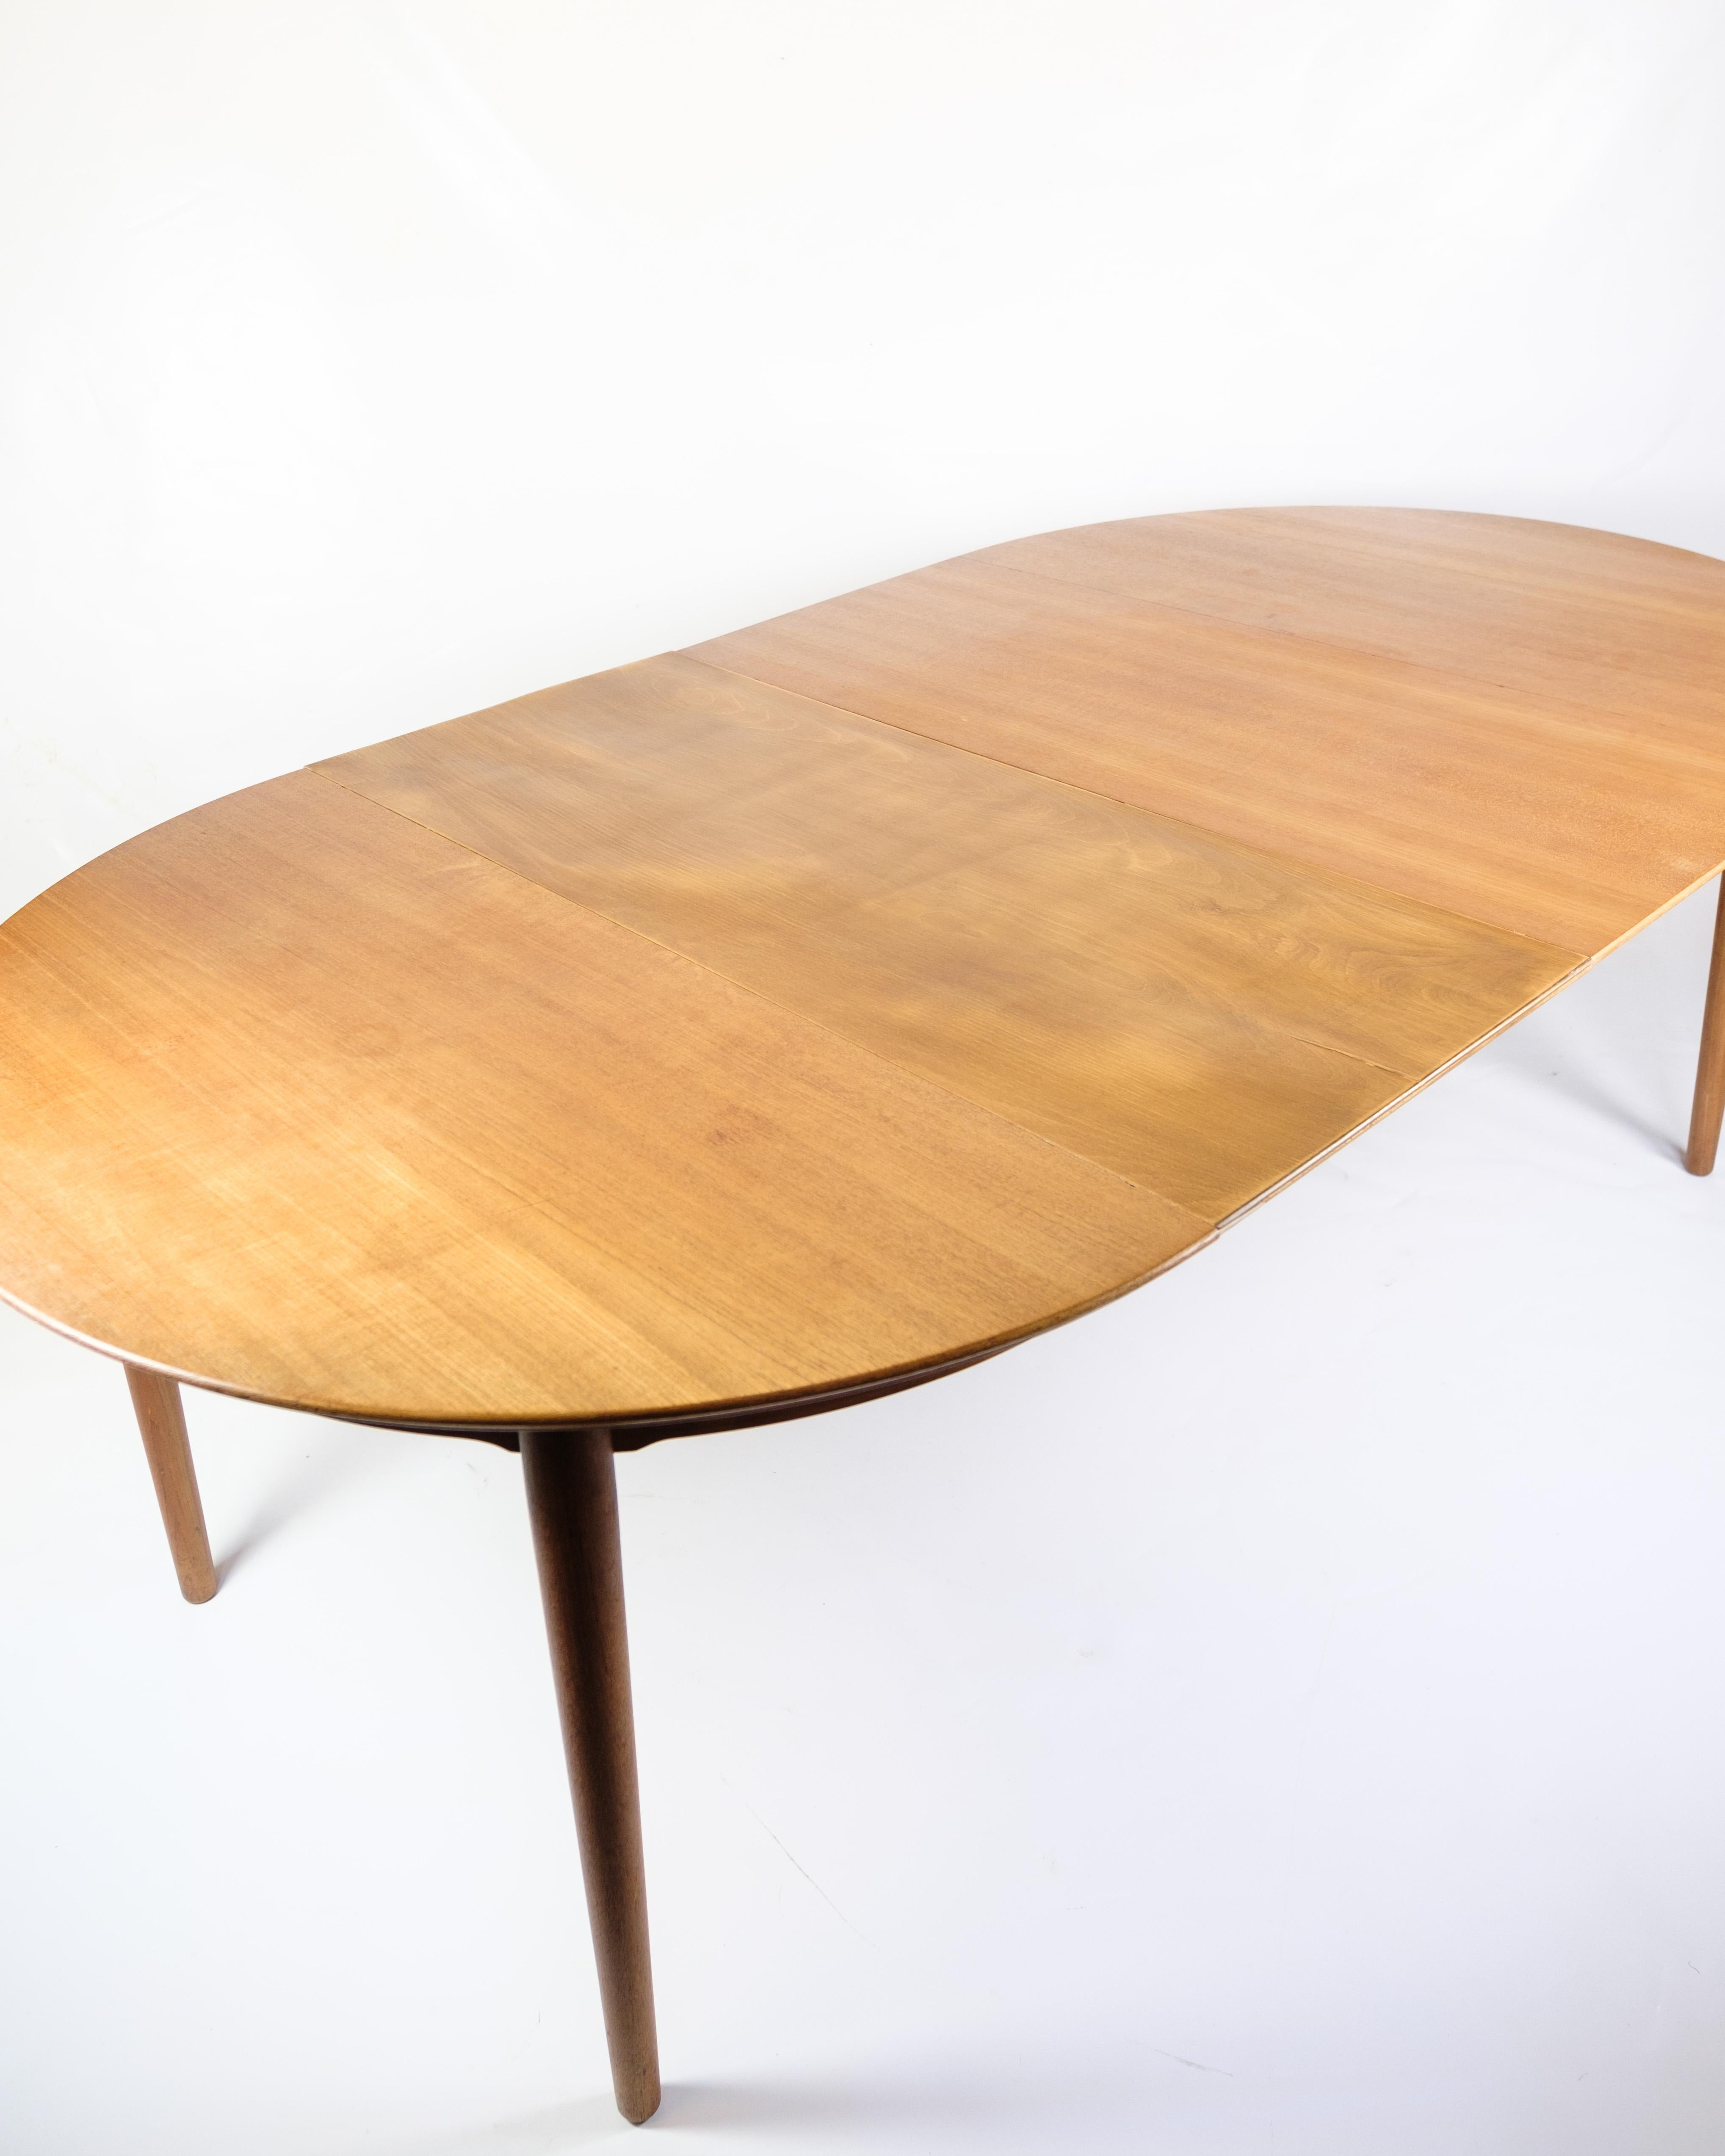 Dining Room Table Made In Teak With Extensions By Arne Vodder From 1960s For Sale 6